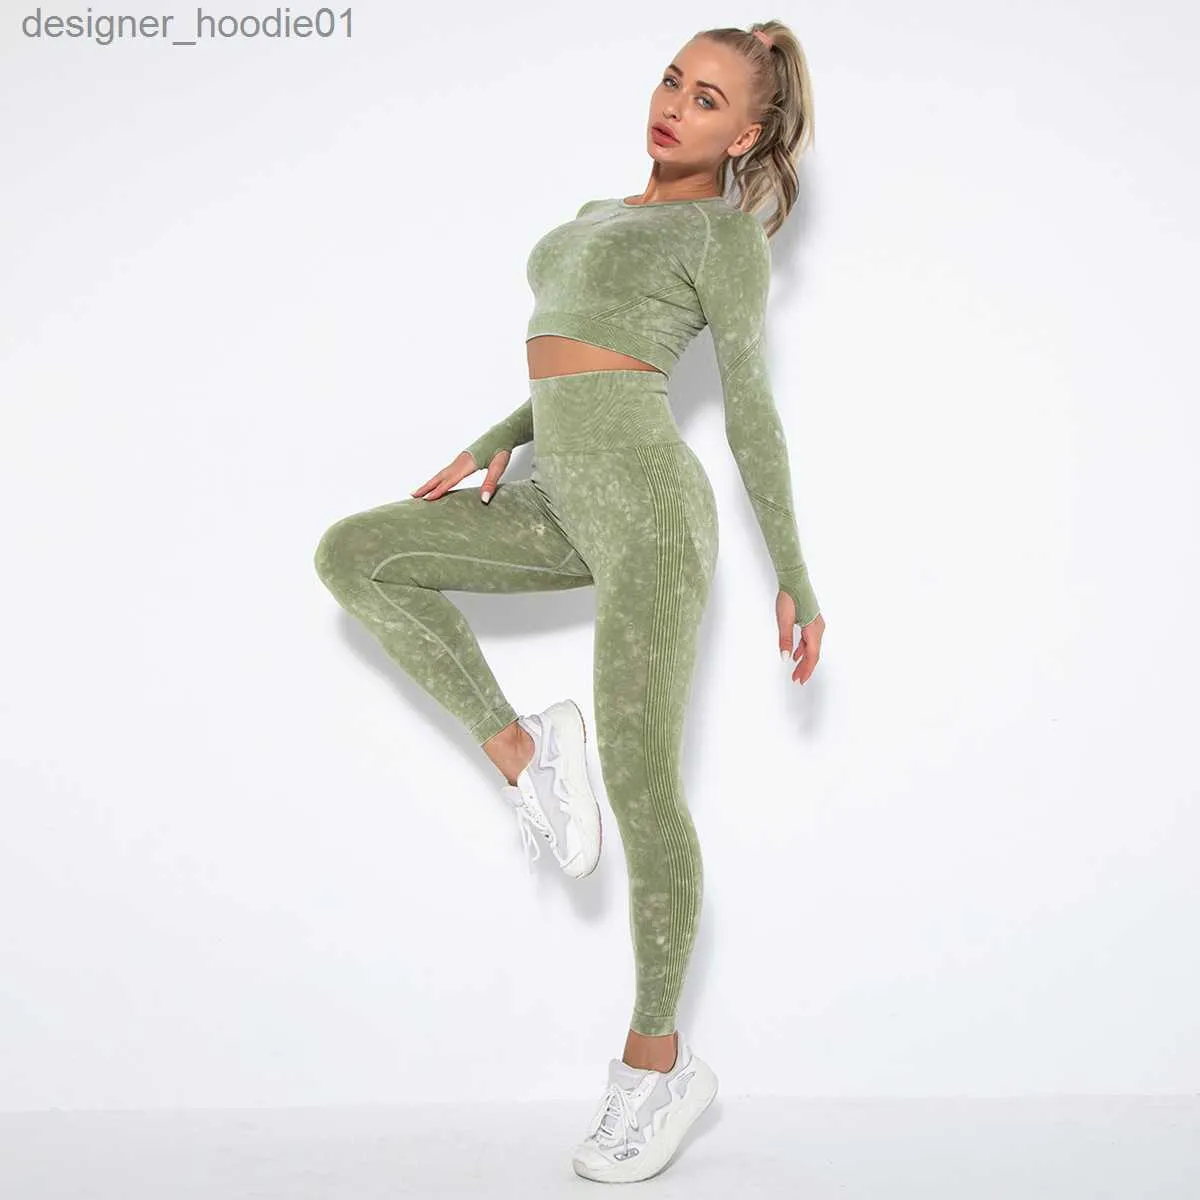 Womens Seamless Long Sleeve Yoga Seamless Workout Leggings Long Crop Top  For Workout, Fitness, And Outdoor Activities From Tracksuit011, $9.06